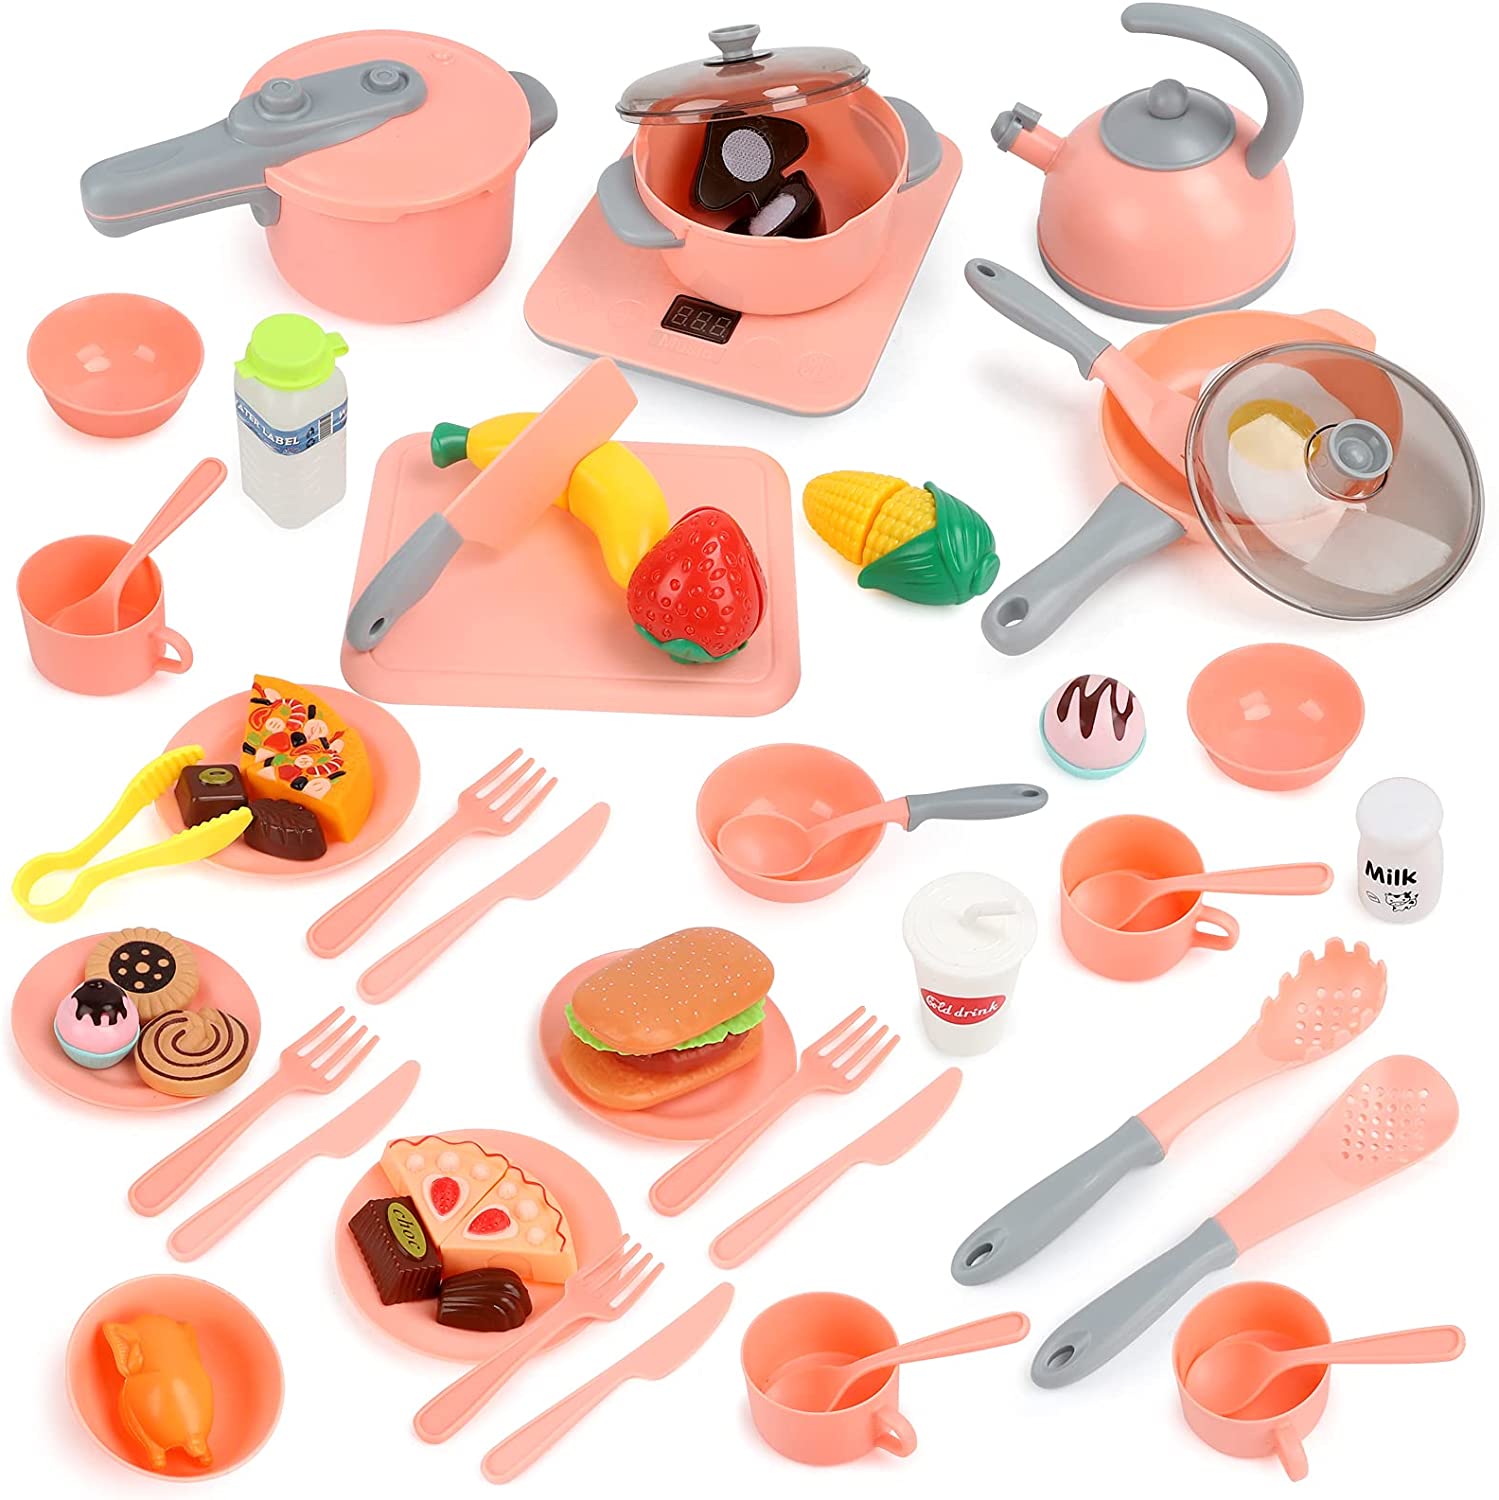 Big Discount Toys Recycled Plastic - BeebeeRun Kids Kitchen Pretend Play Toys 61PCS Cooking Set for Toddlers Cookware Pots and Pans Playset, Cooking Utensils, Toy Cutlery, Cutting Play Food –...